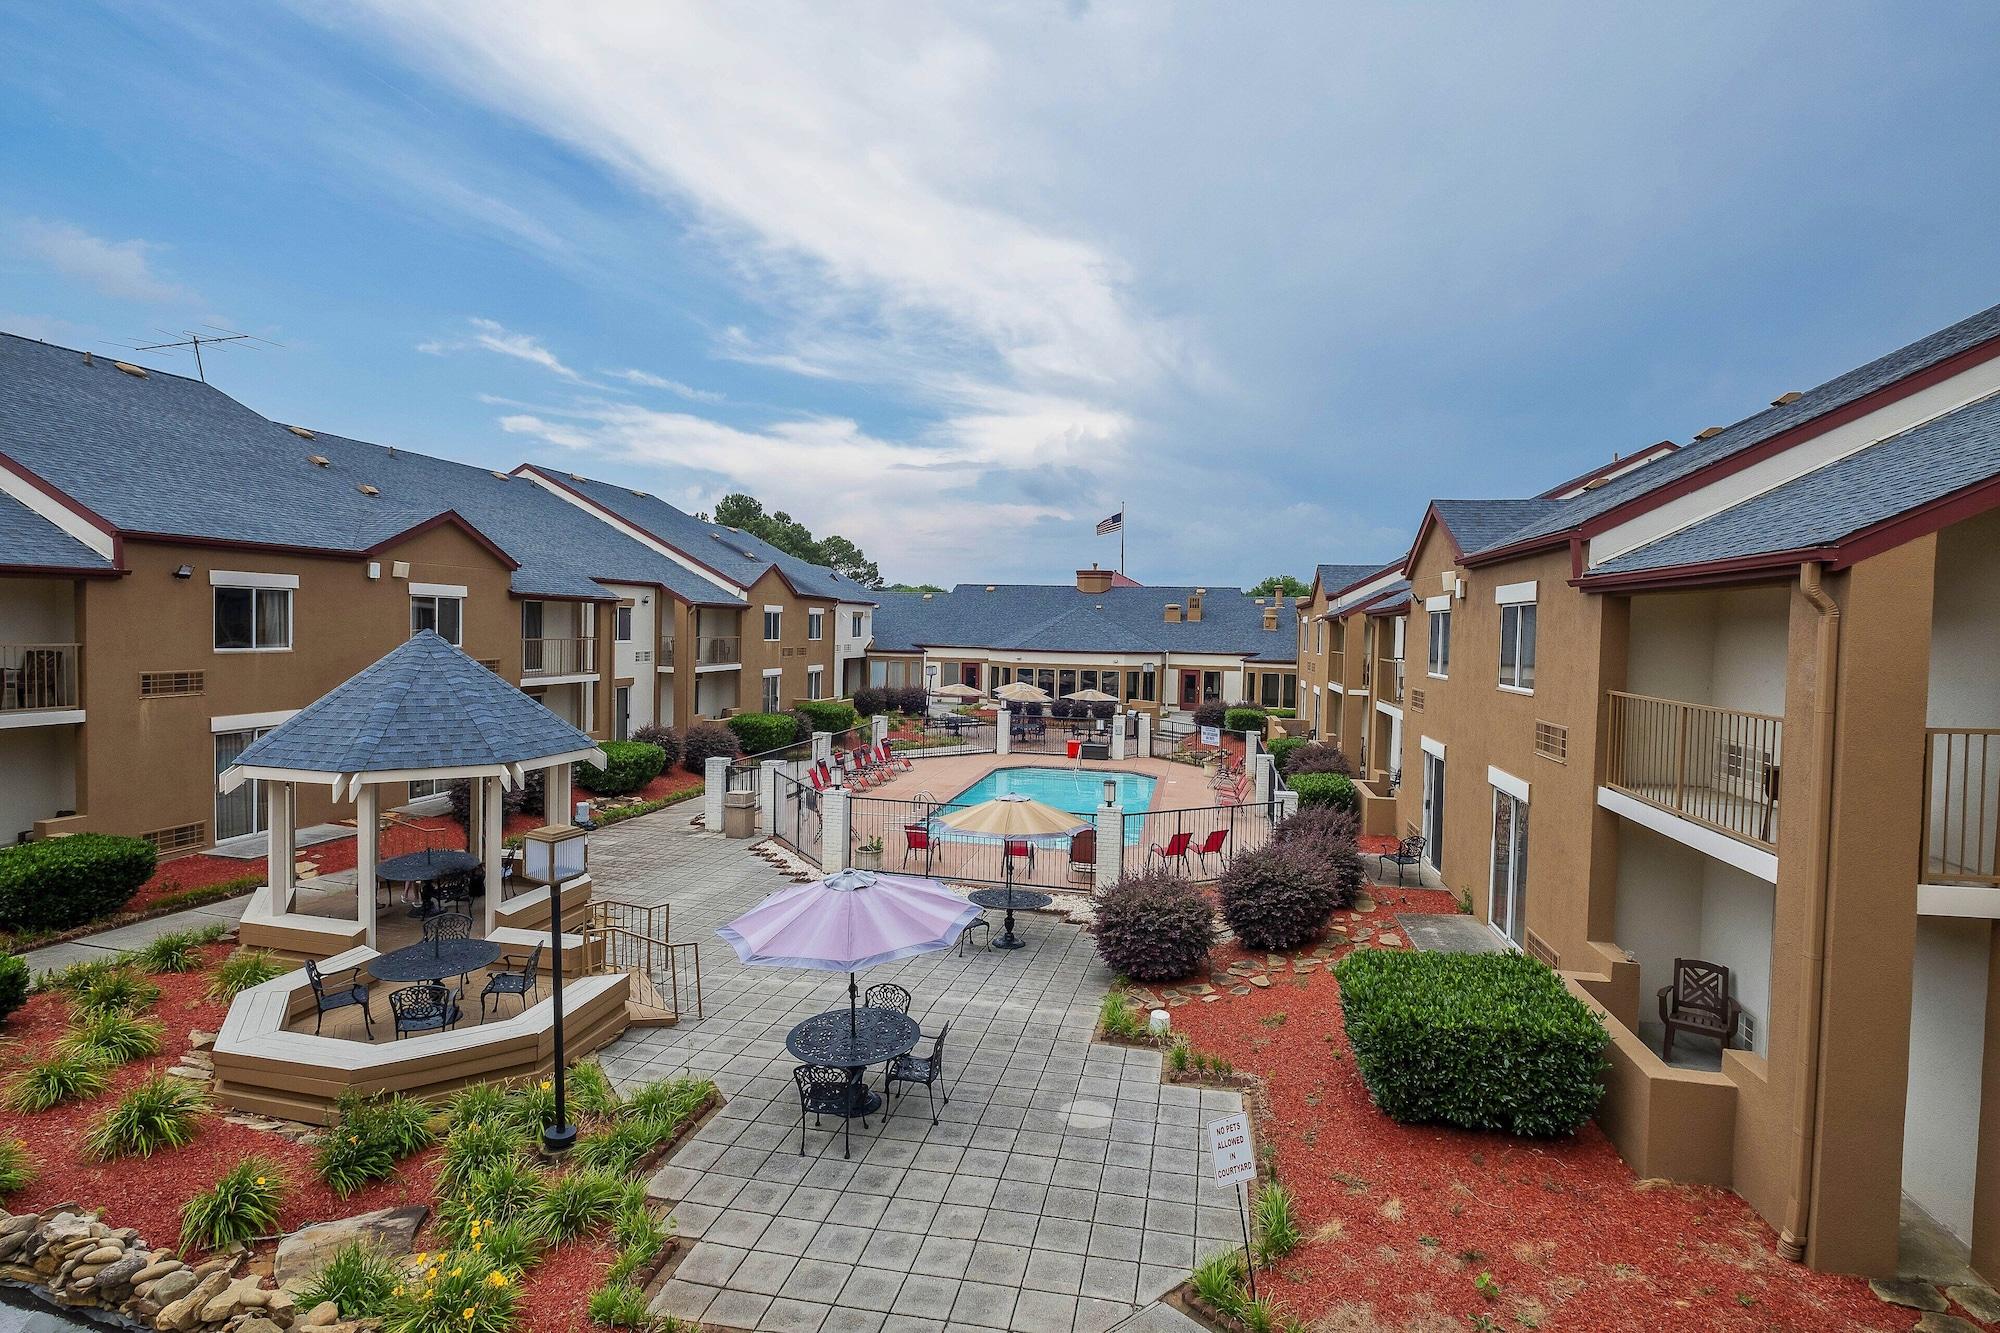 Red Roof Inn PLUS+&Suites Knoxville West - Cedar Bluff Exterior foto